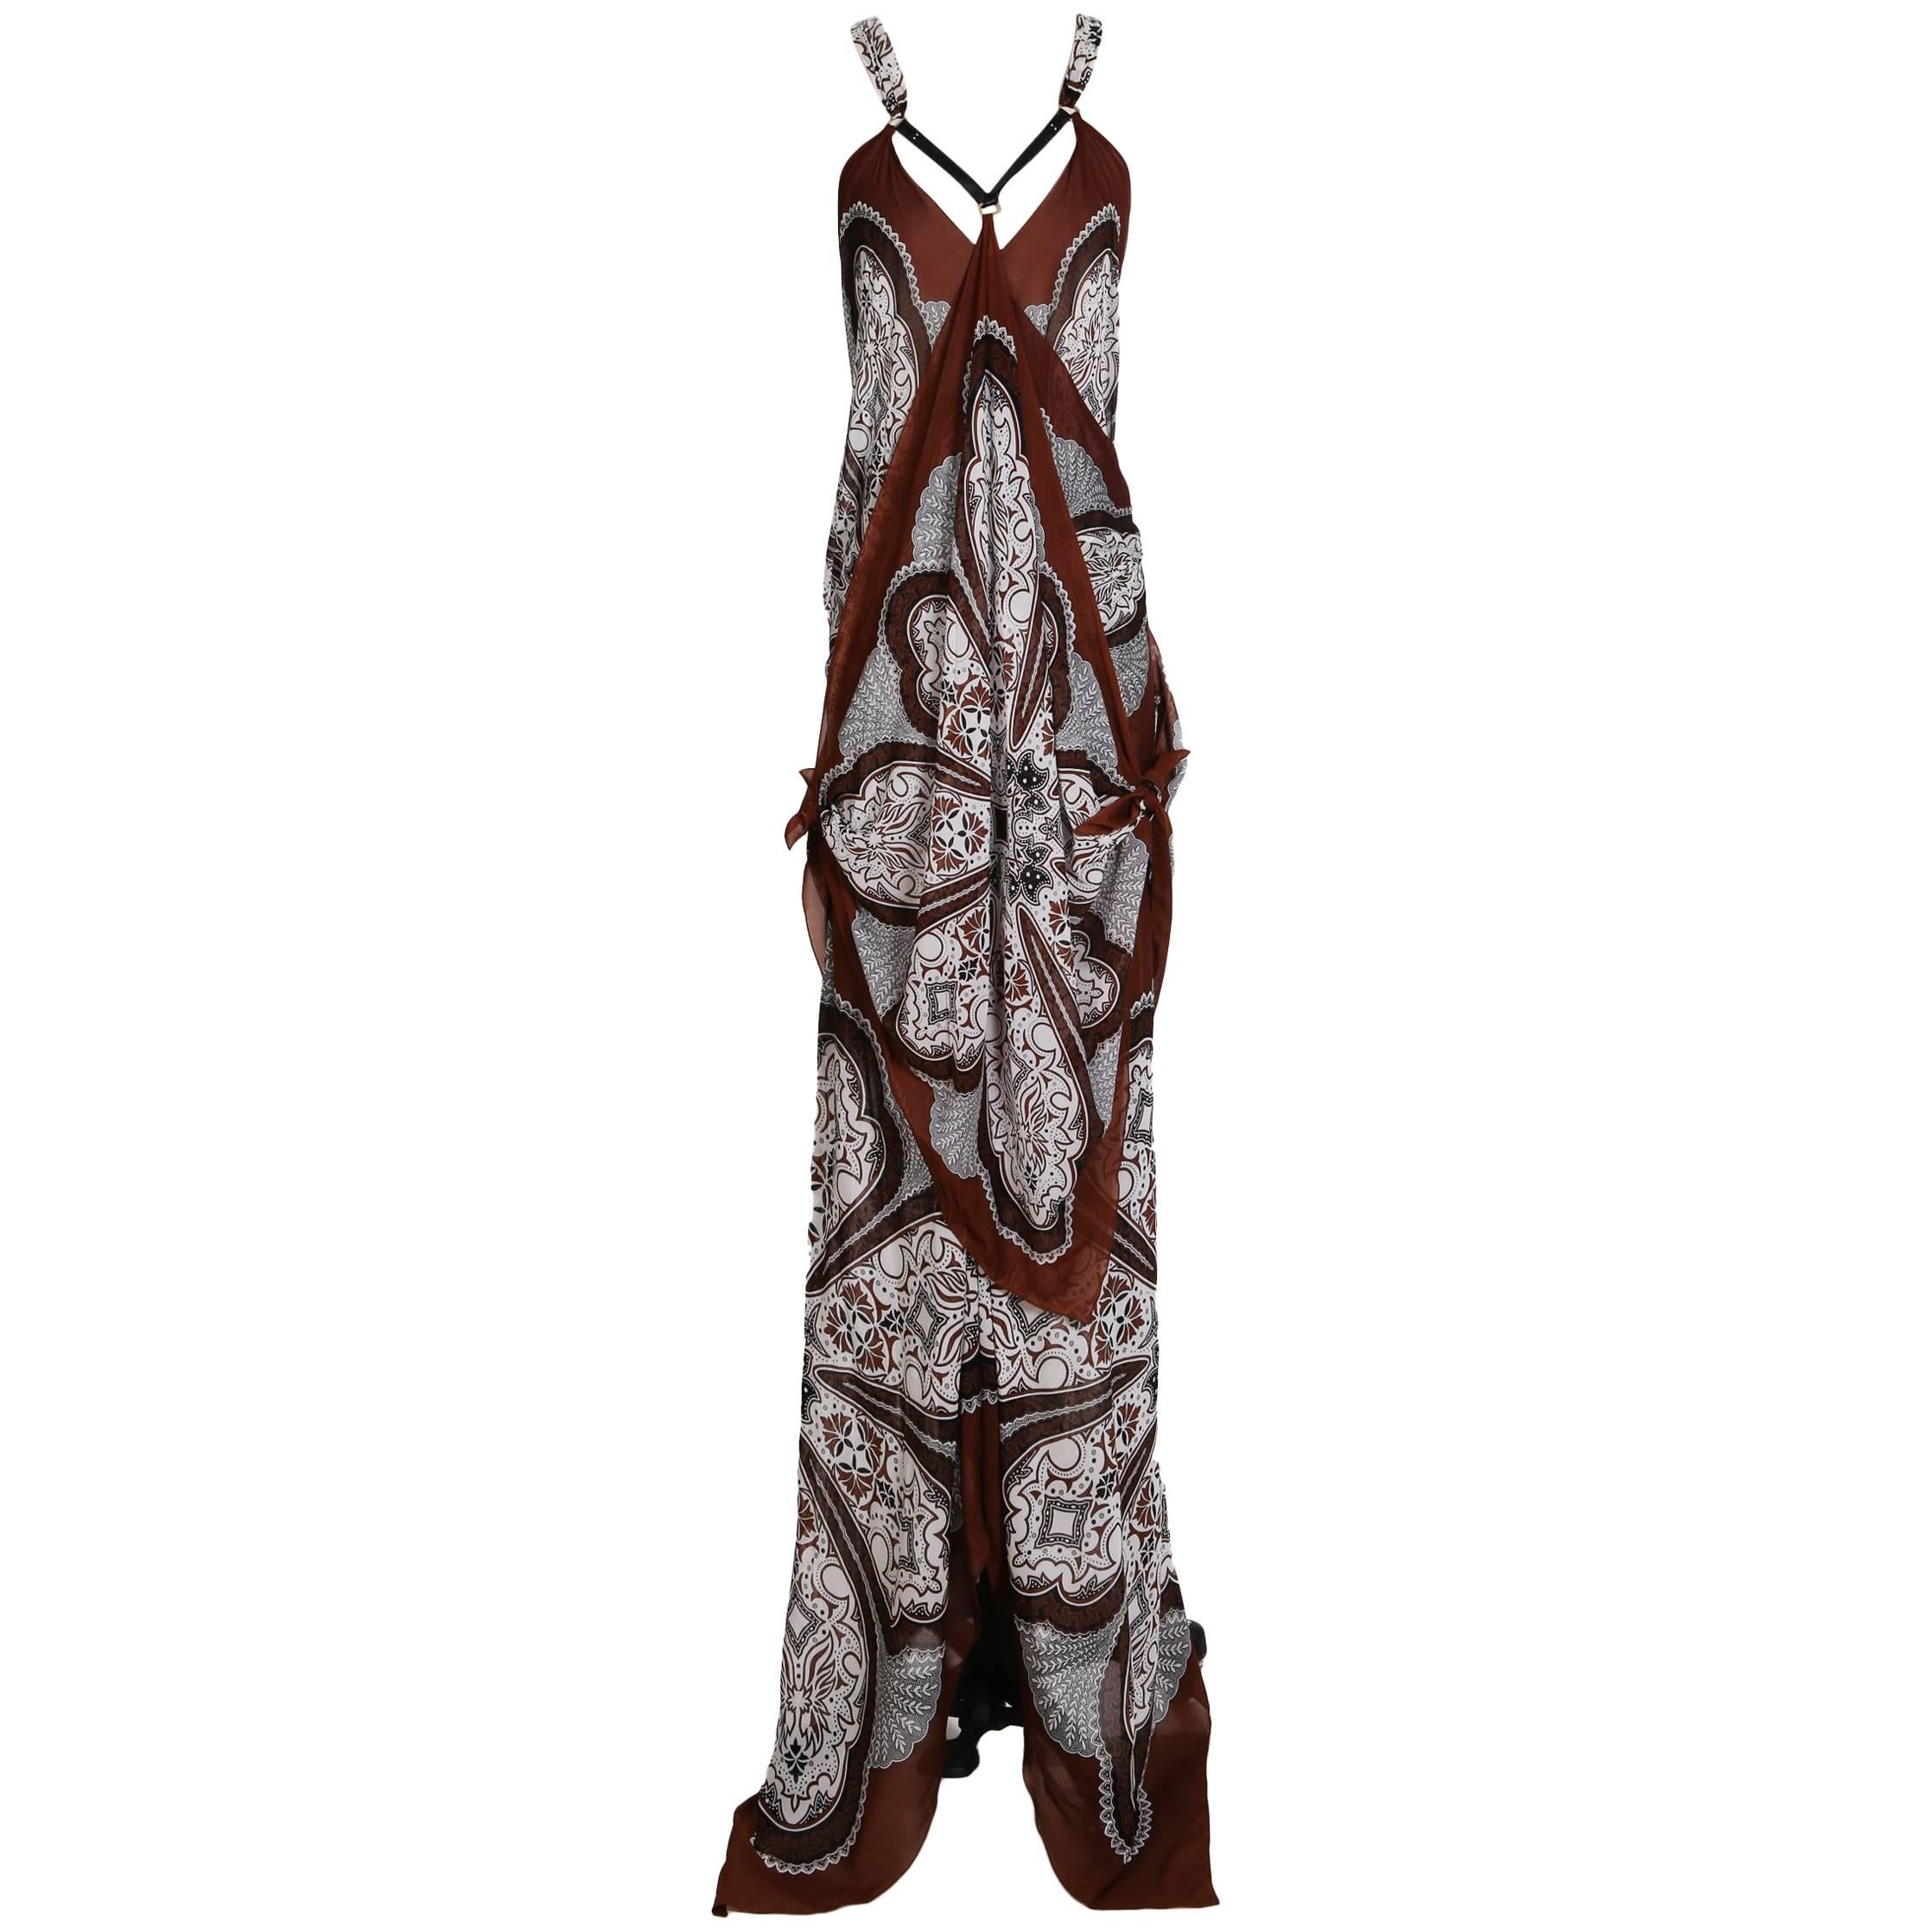 Tom Ford for Gucci Bandana Maxi Dress, circa late 1990s early 2000s